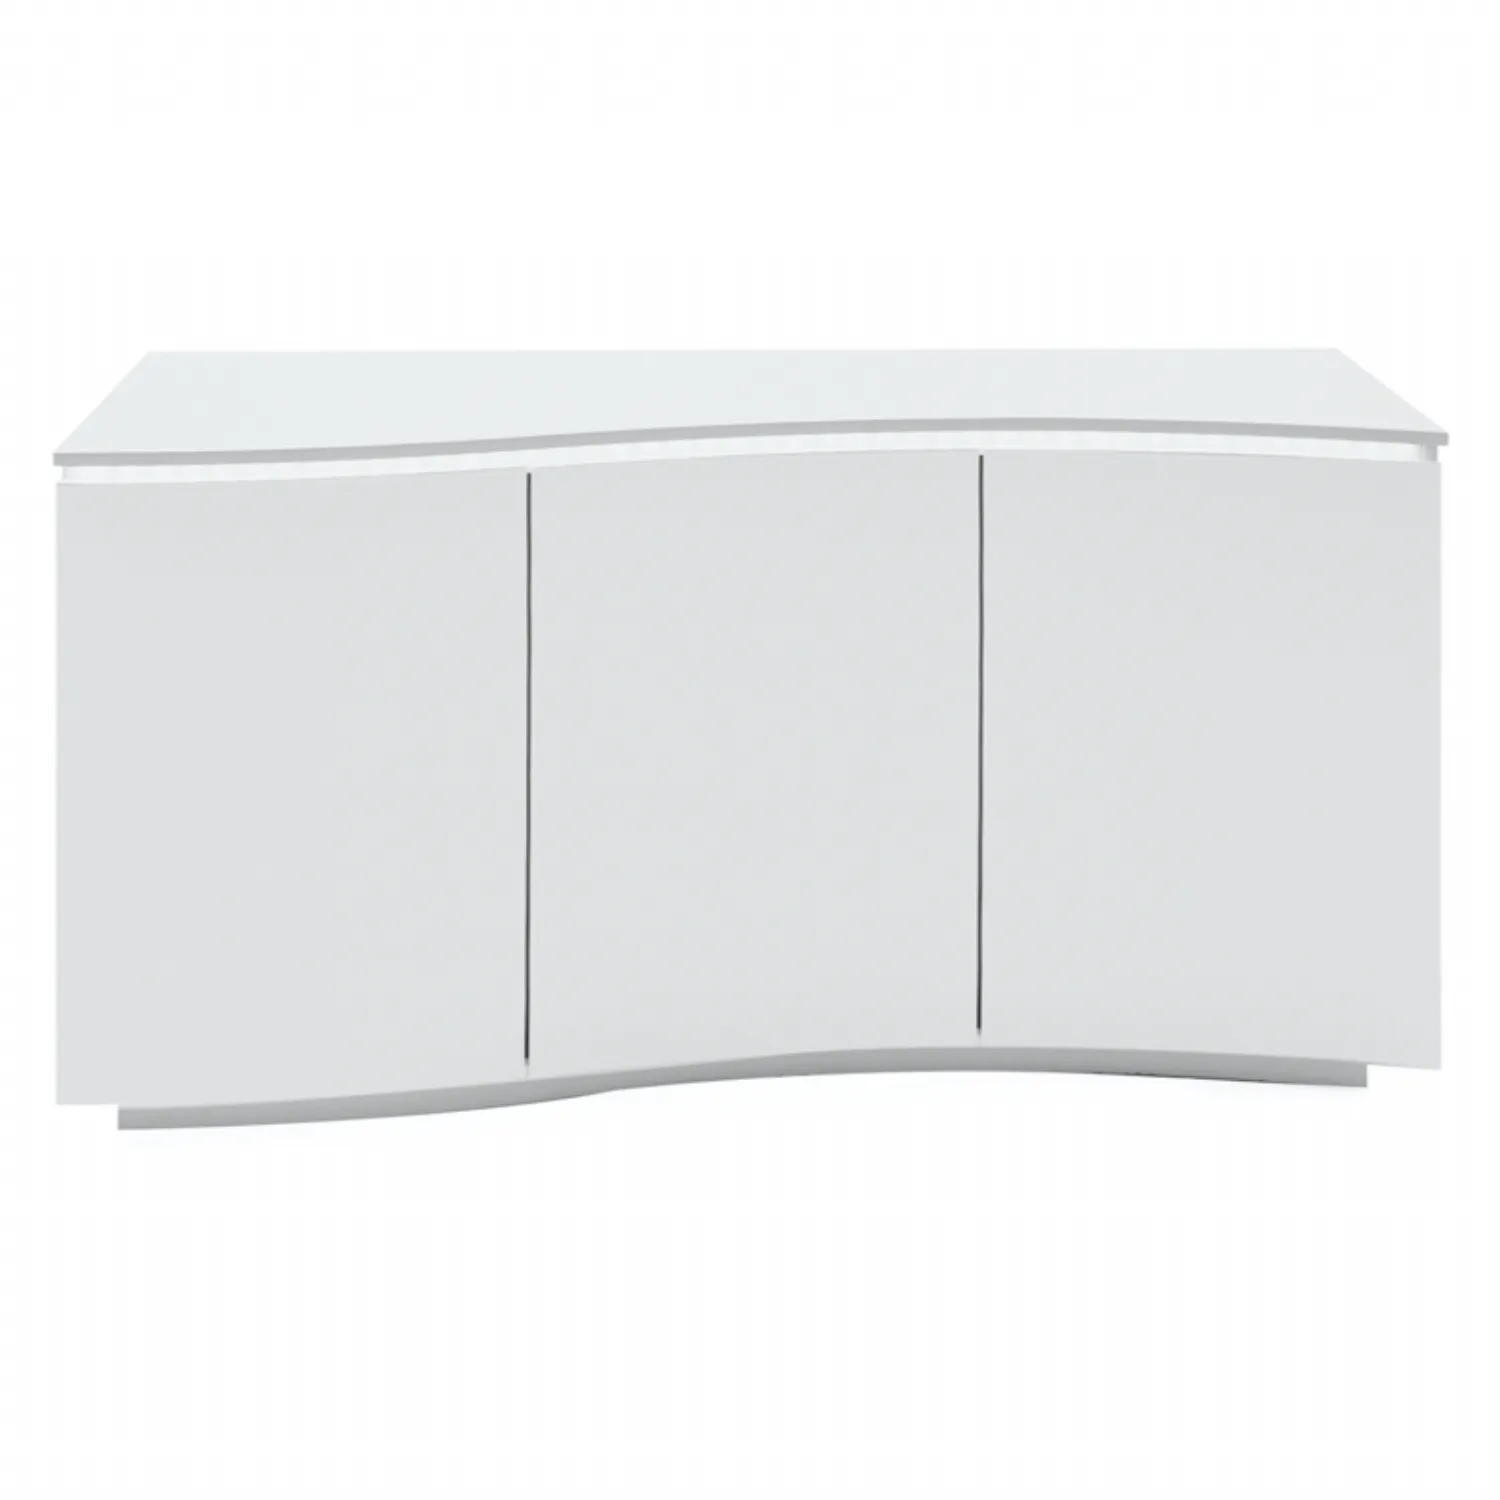 White High Gloss Curved Sideboard with LED Lights